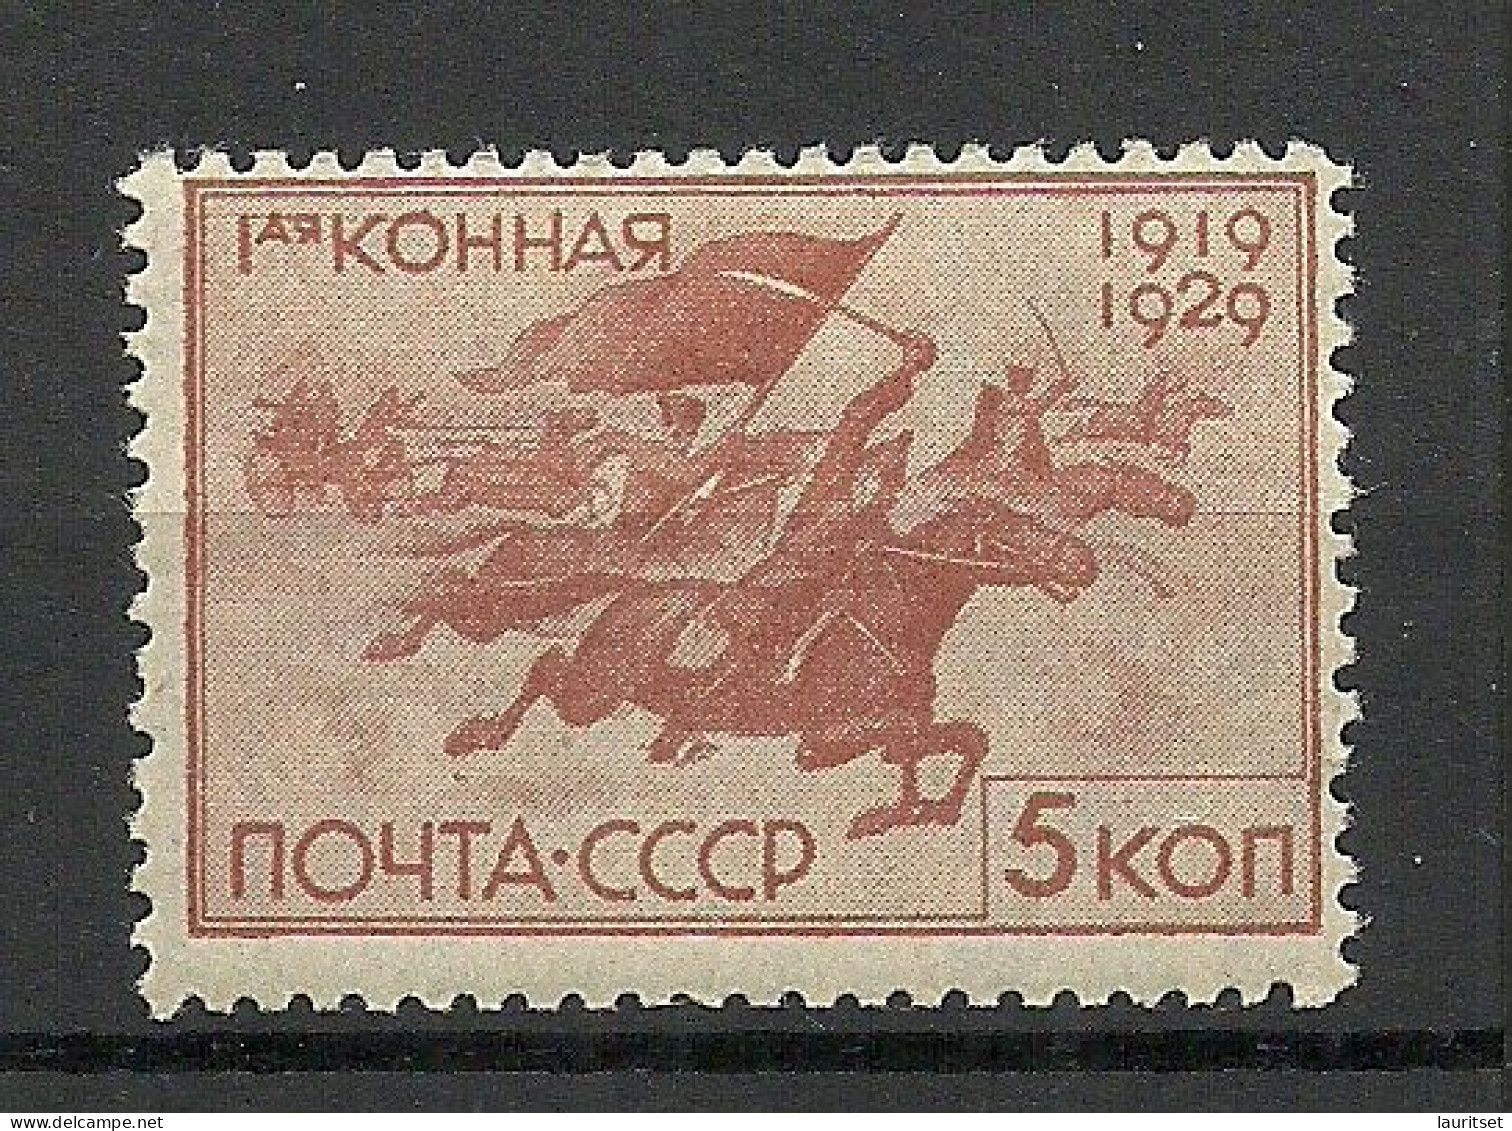 RUSSLAND RUSSIA 1929 Michel 386 * - Unused Stamps